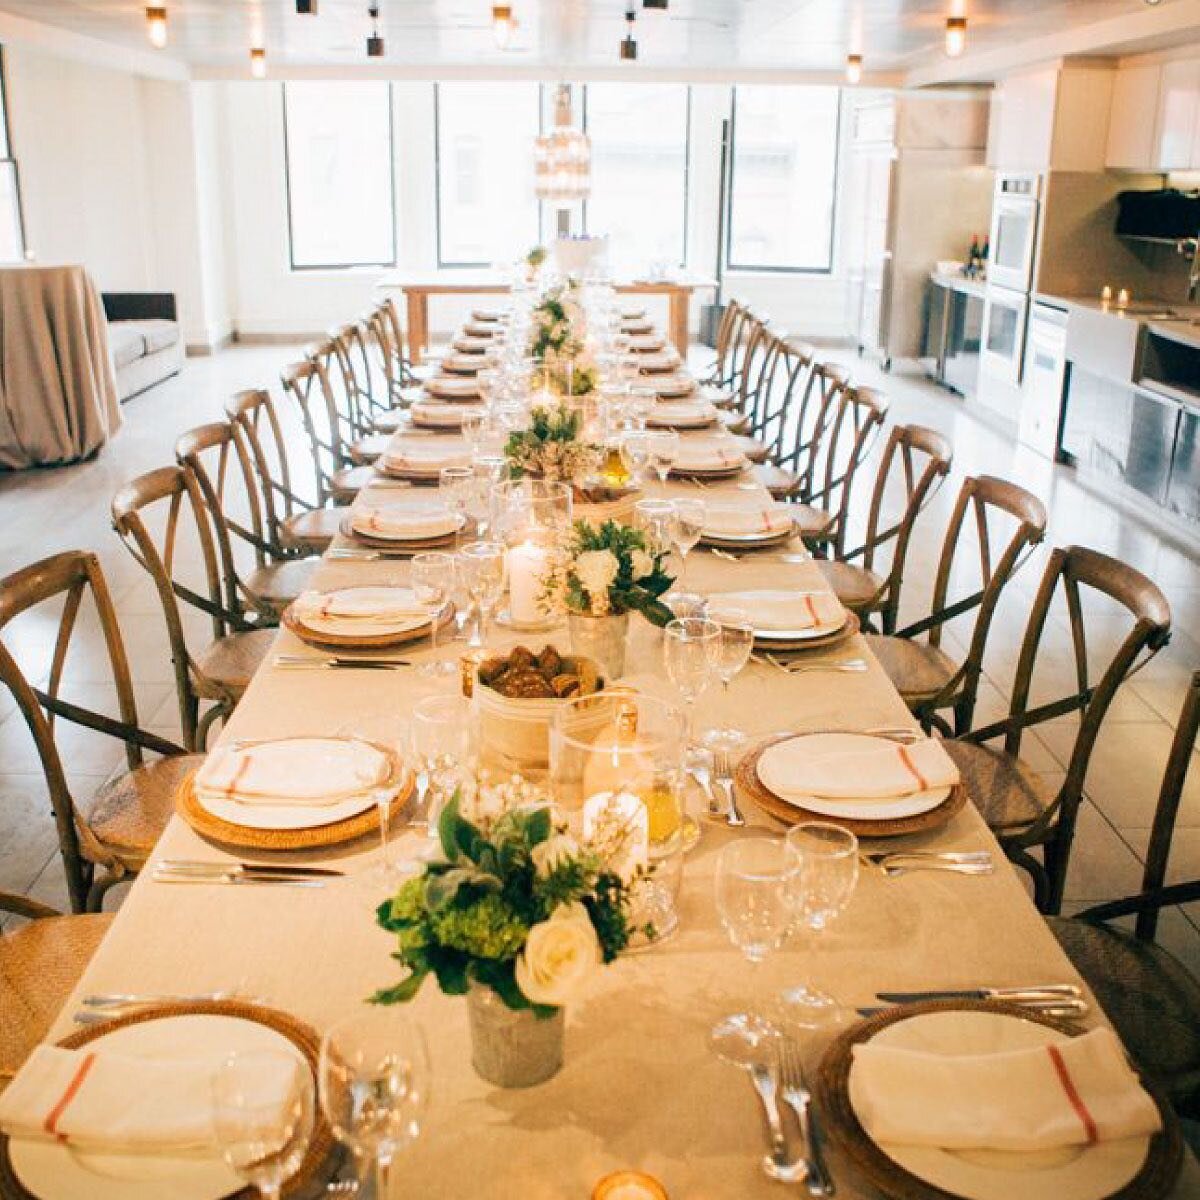 Taste of DC&rsquo;s Demo Kitchen is the perfect space to host culinary events, like cooking classes. Bon App&eacute;tit! 

#nationalunionbuilding #washingtondc #eventvenue #historicbuildings #weddingvenue #washingtondclife #washingtondcnightlife #the